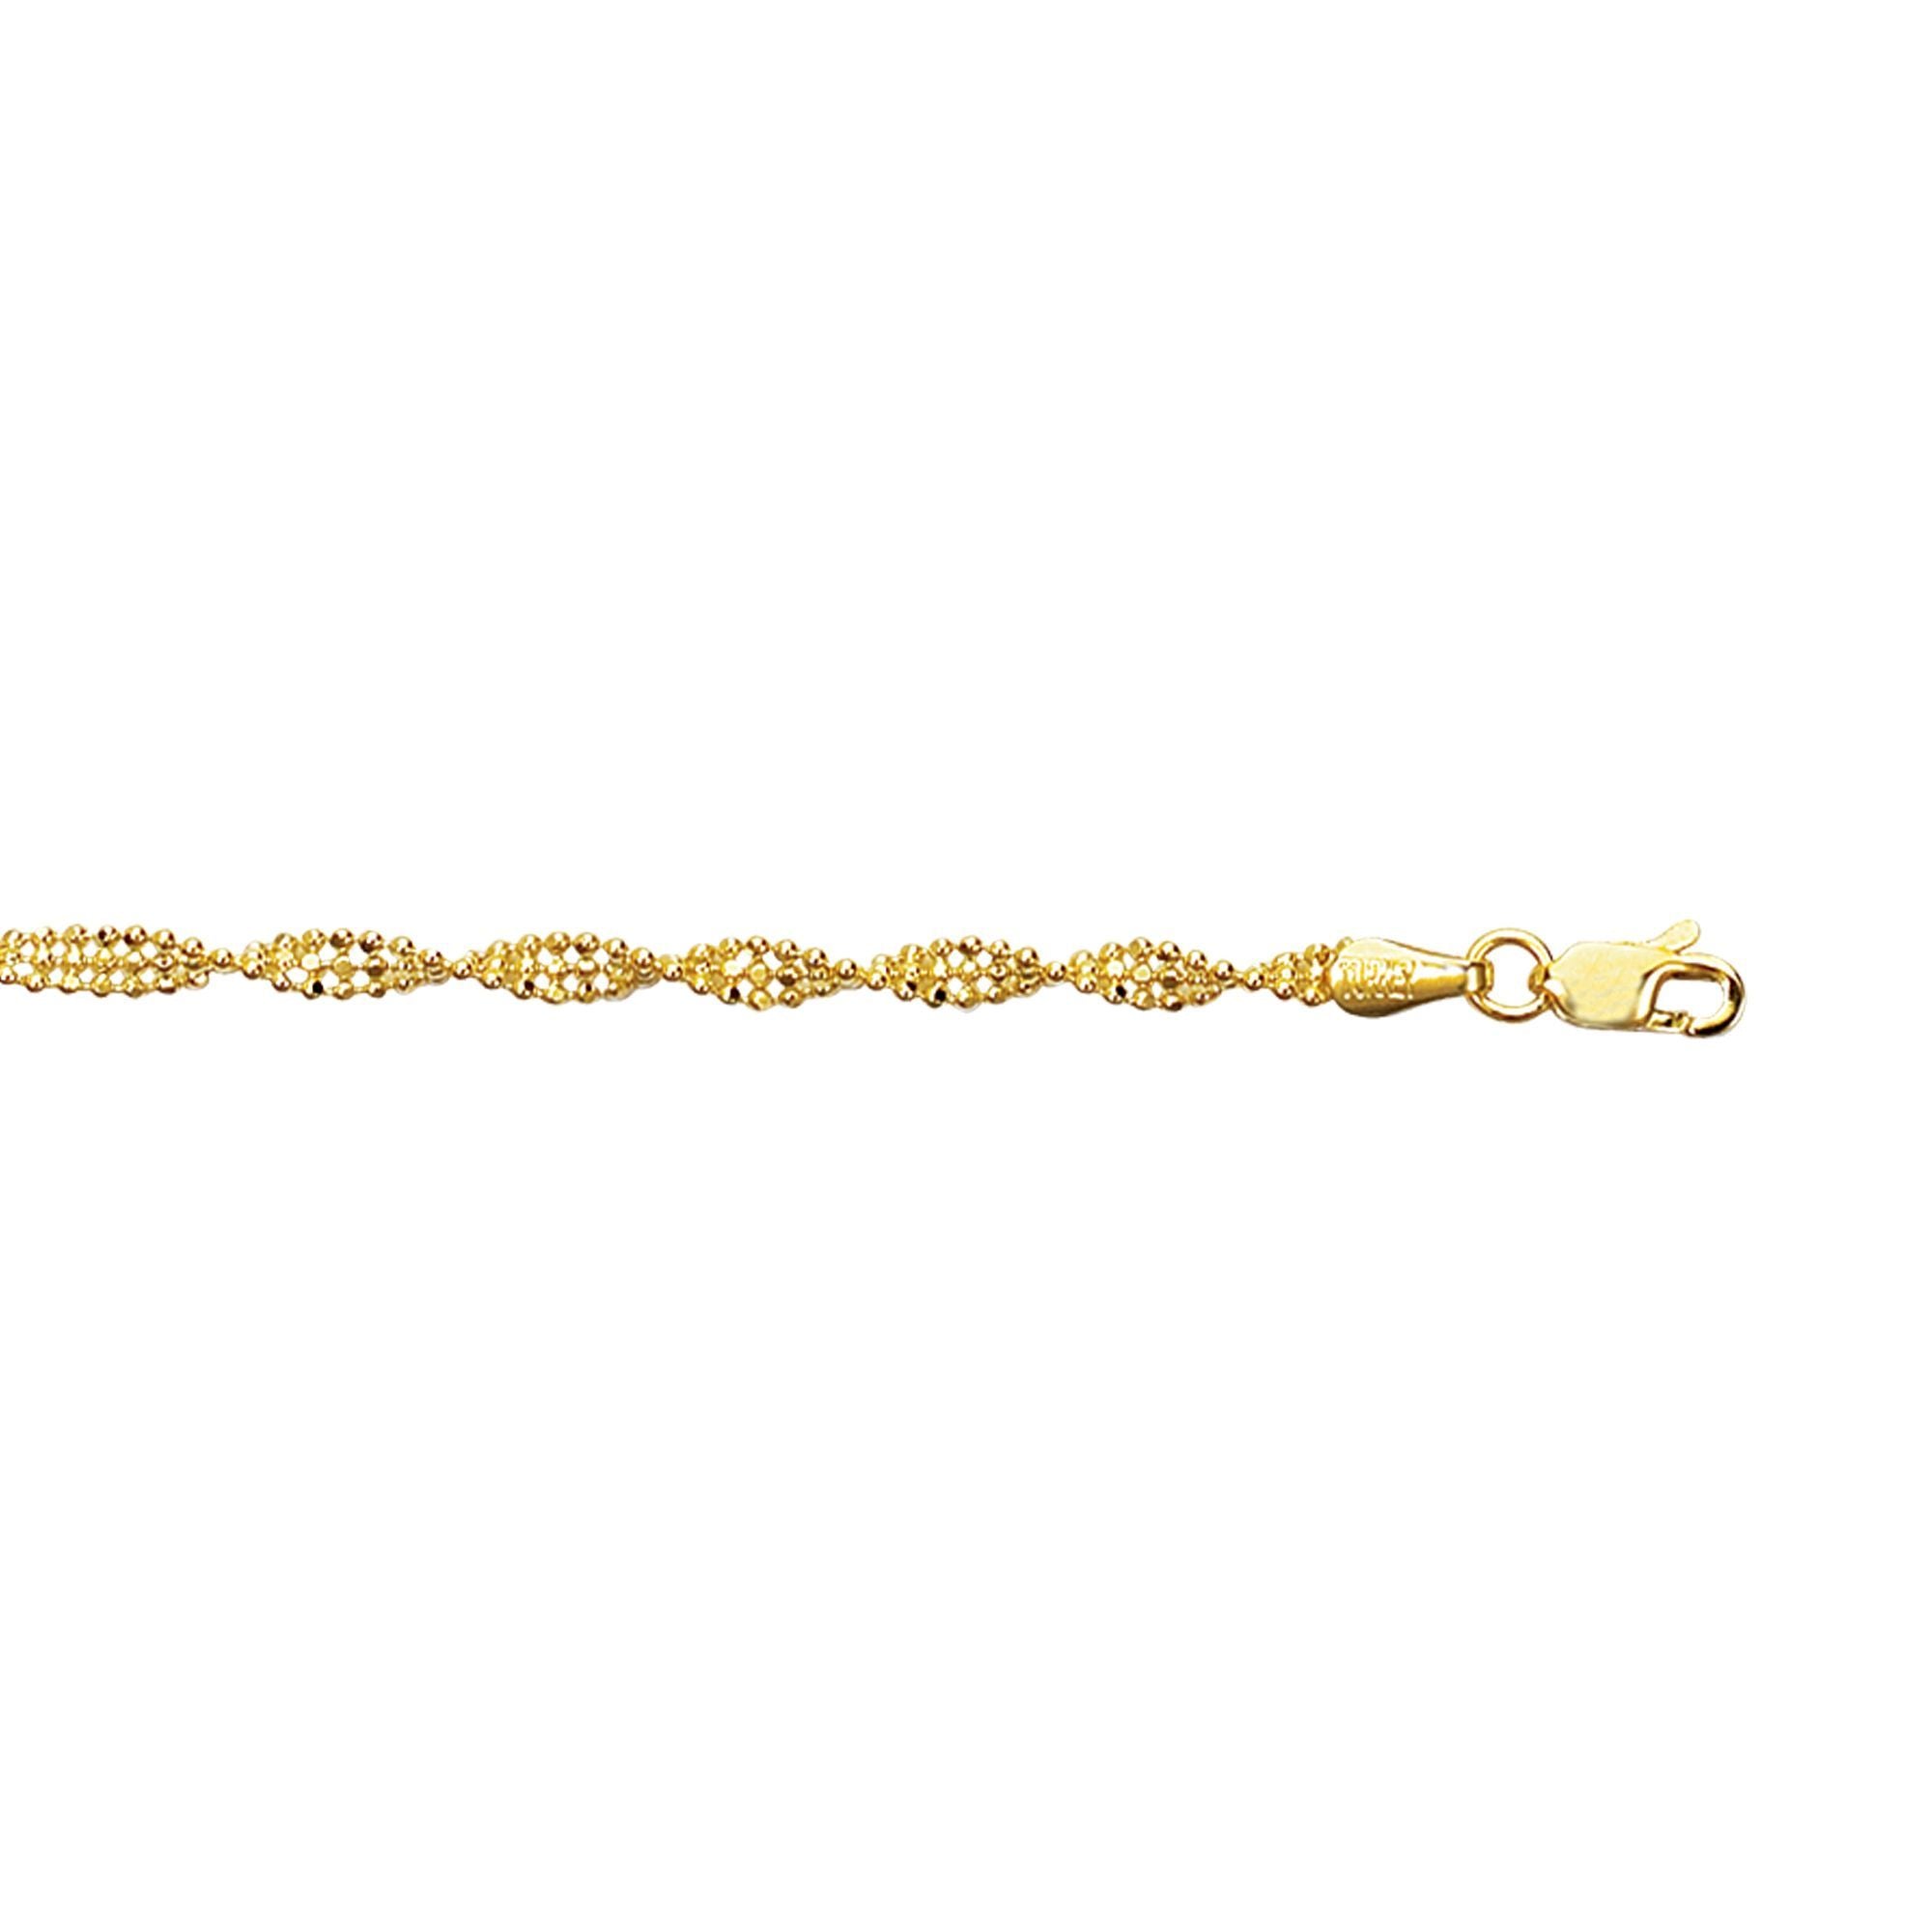 Shiny Diamond Cut 3mm Twisted Bead Chain Bracelet with Lobster Clasp - wingroupjewelry